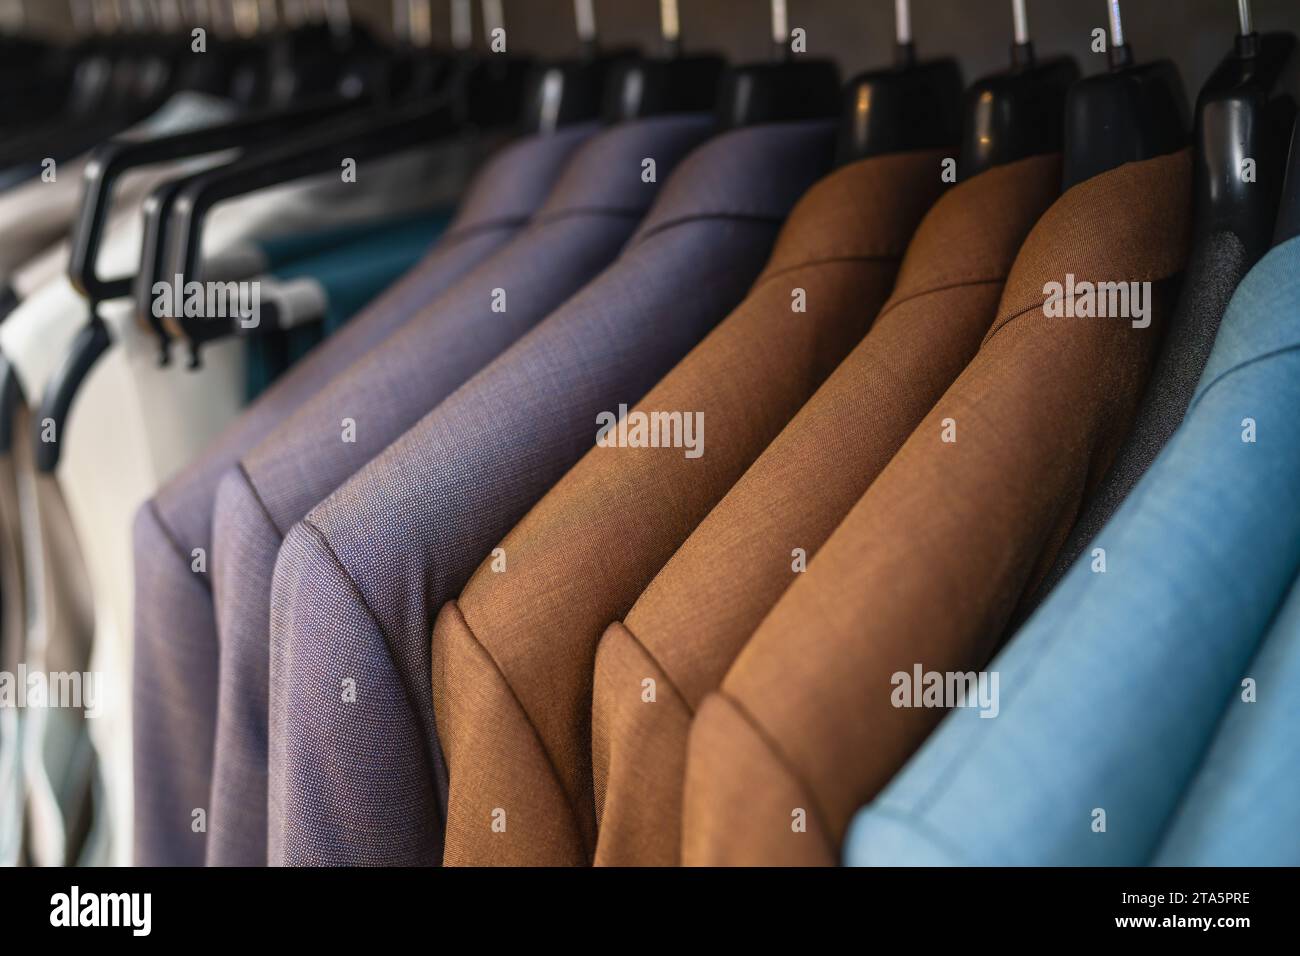 Row of suits on hangers, varying shades of brown and blue, formal wear display at a store Stock Photo